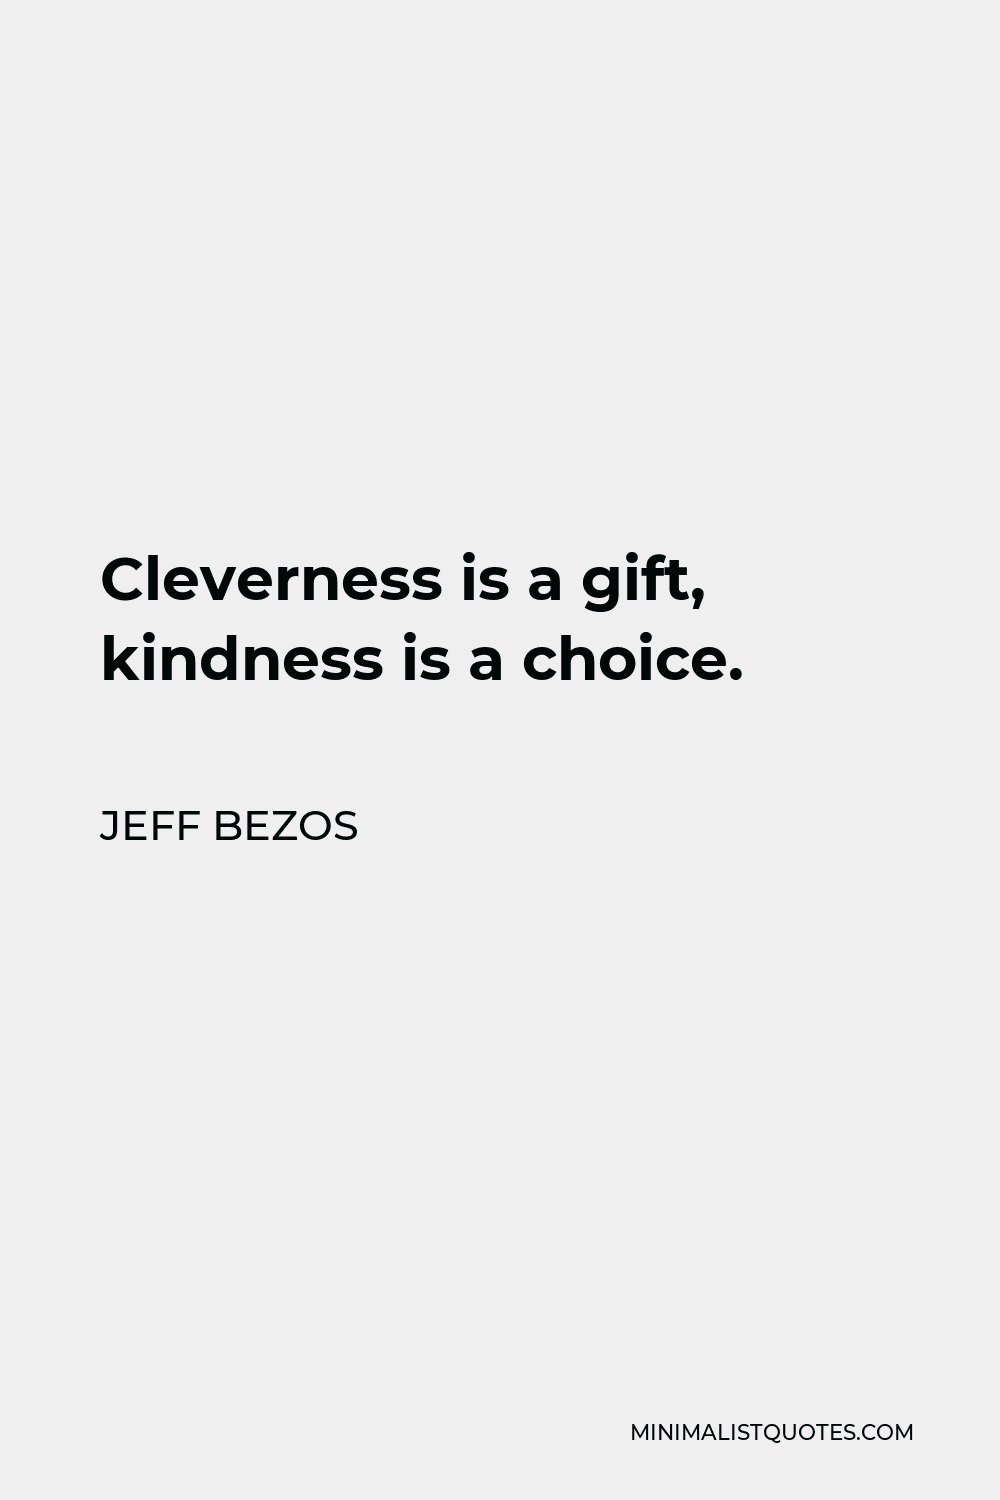 Jeff Bezos Quote - Cleverness is a gift, kindness is a choice.